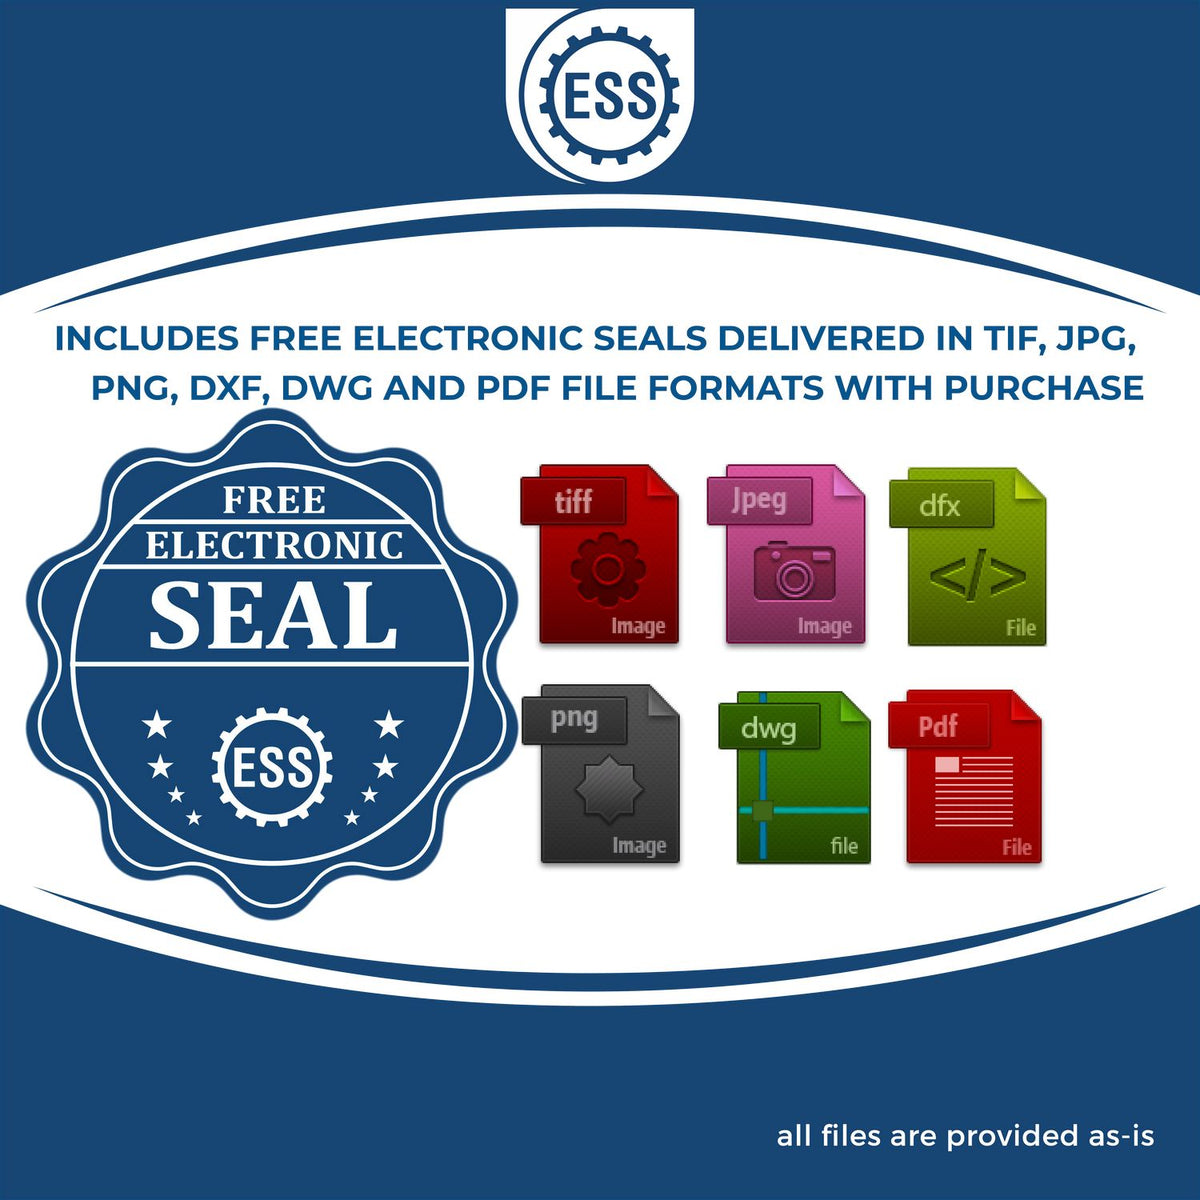 An infographic for the free electronic seal for the Soft Guam Professional Geologist Seal illustrating the different file type icons such as DXF, DWG, TIF, JPG and PNG.